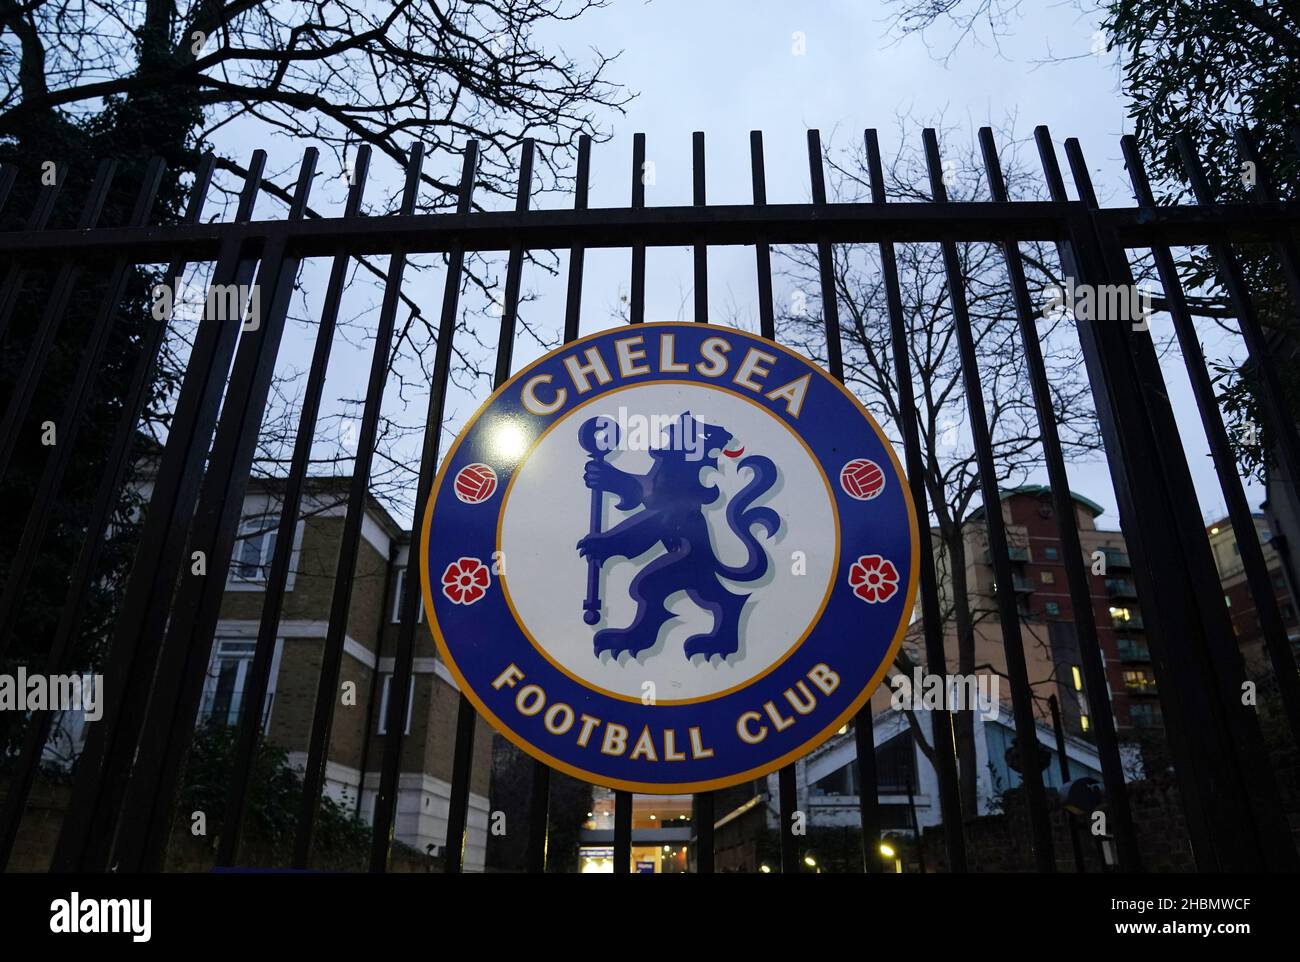 Stamford Gate, Chelsea FC, Close-up of Chelsea FC Lion Badge Emblem.  Editorial Stock Photo - Image of british, club: 242557533